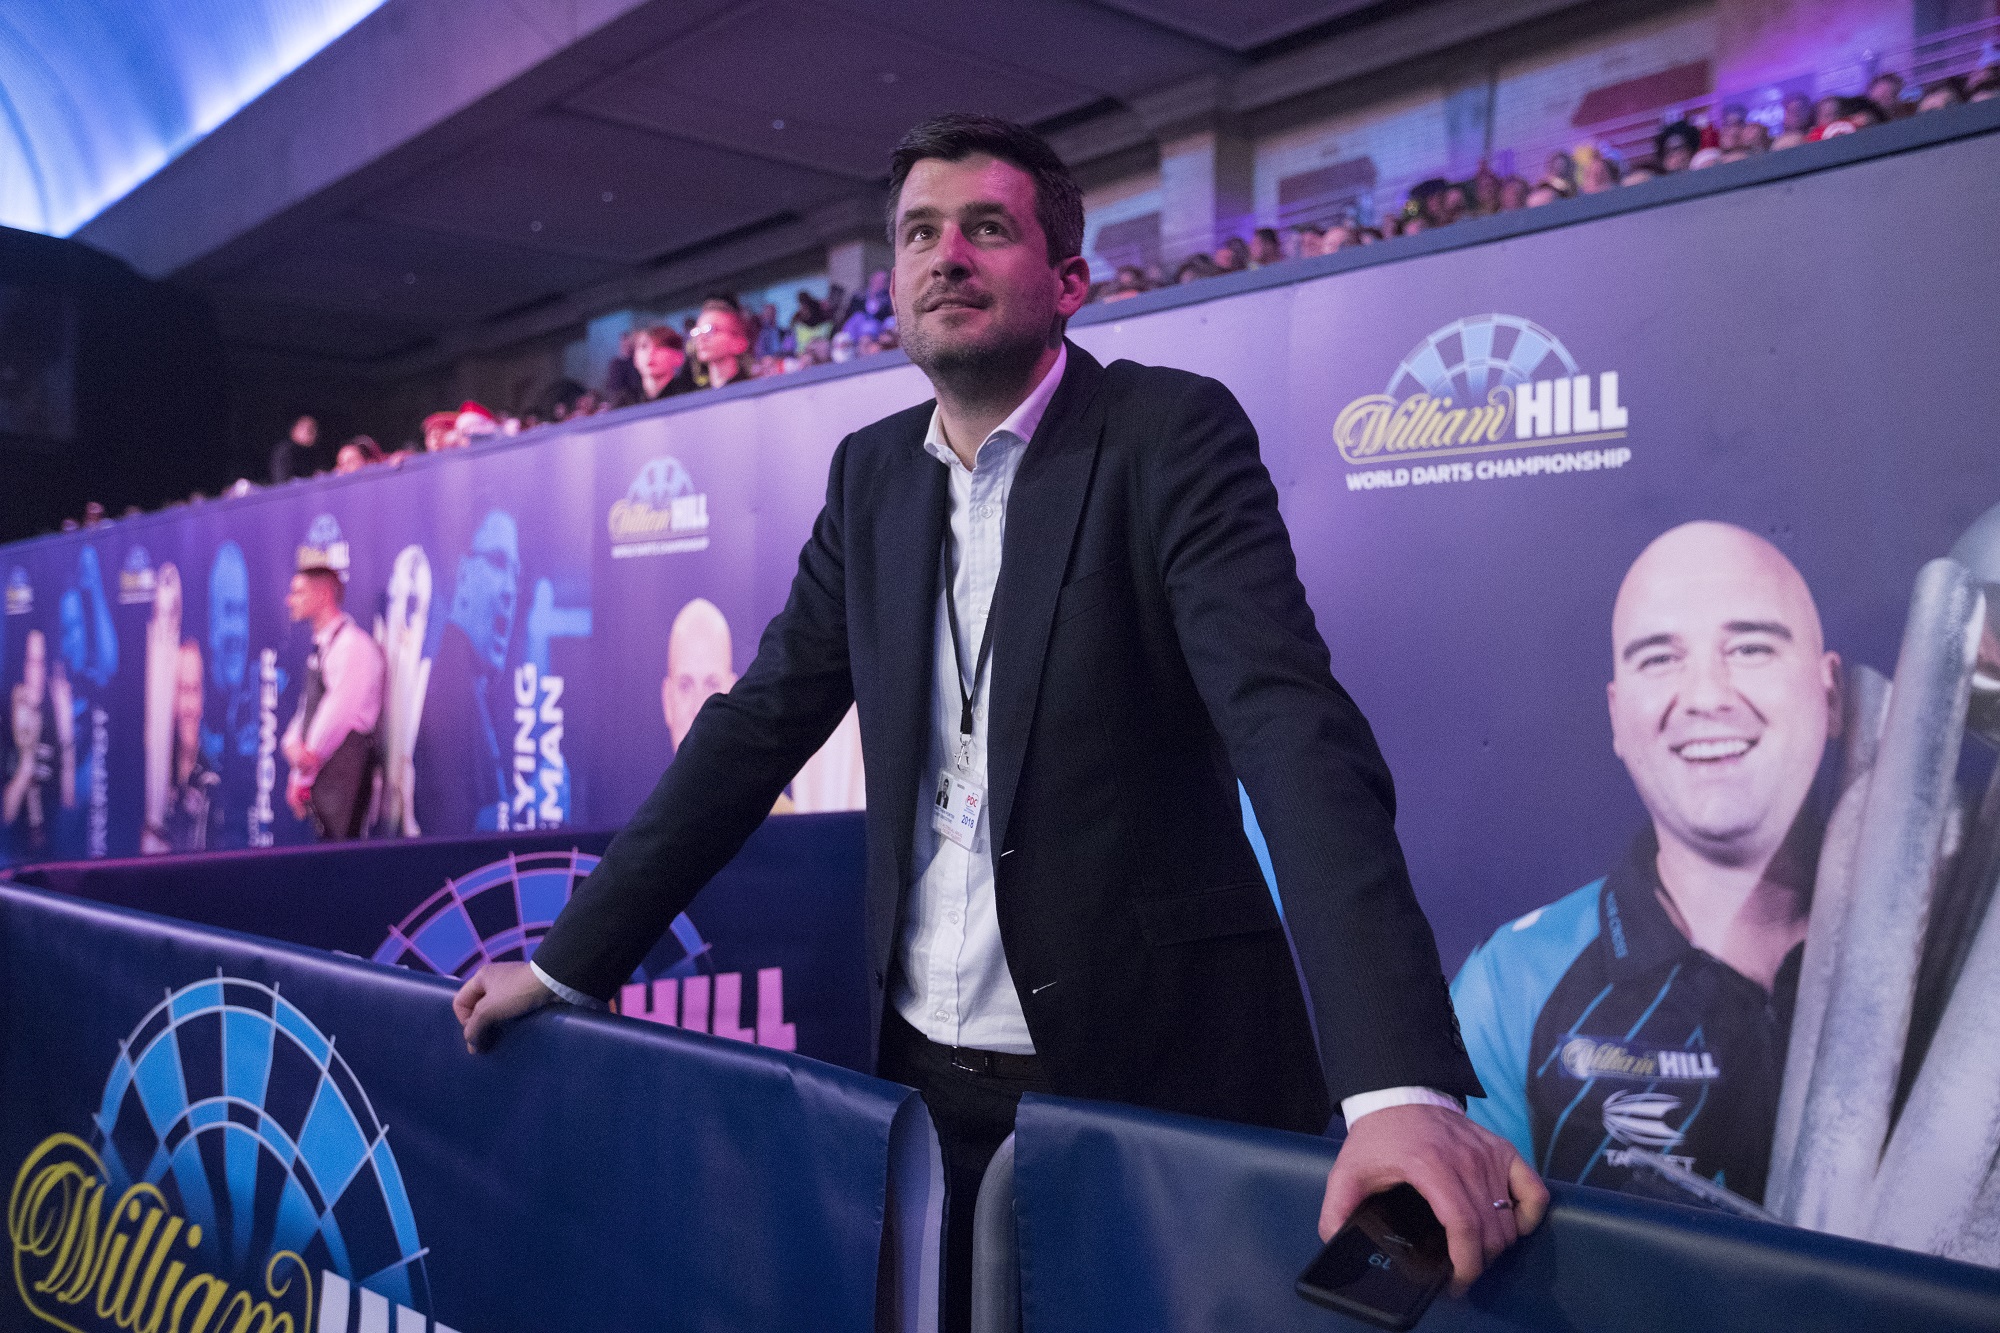 Matt Porter on plans for the Premier League, Matchplay and the rest of 2021